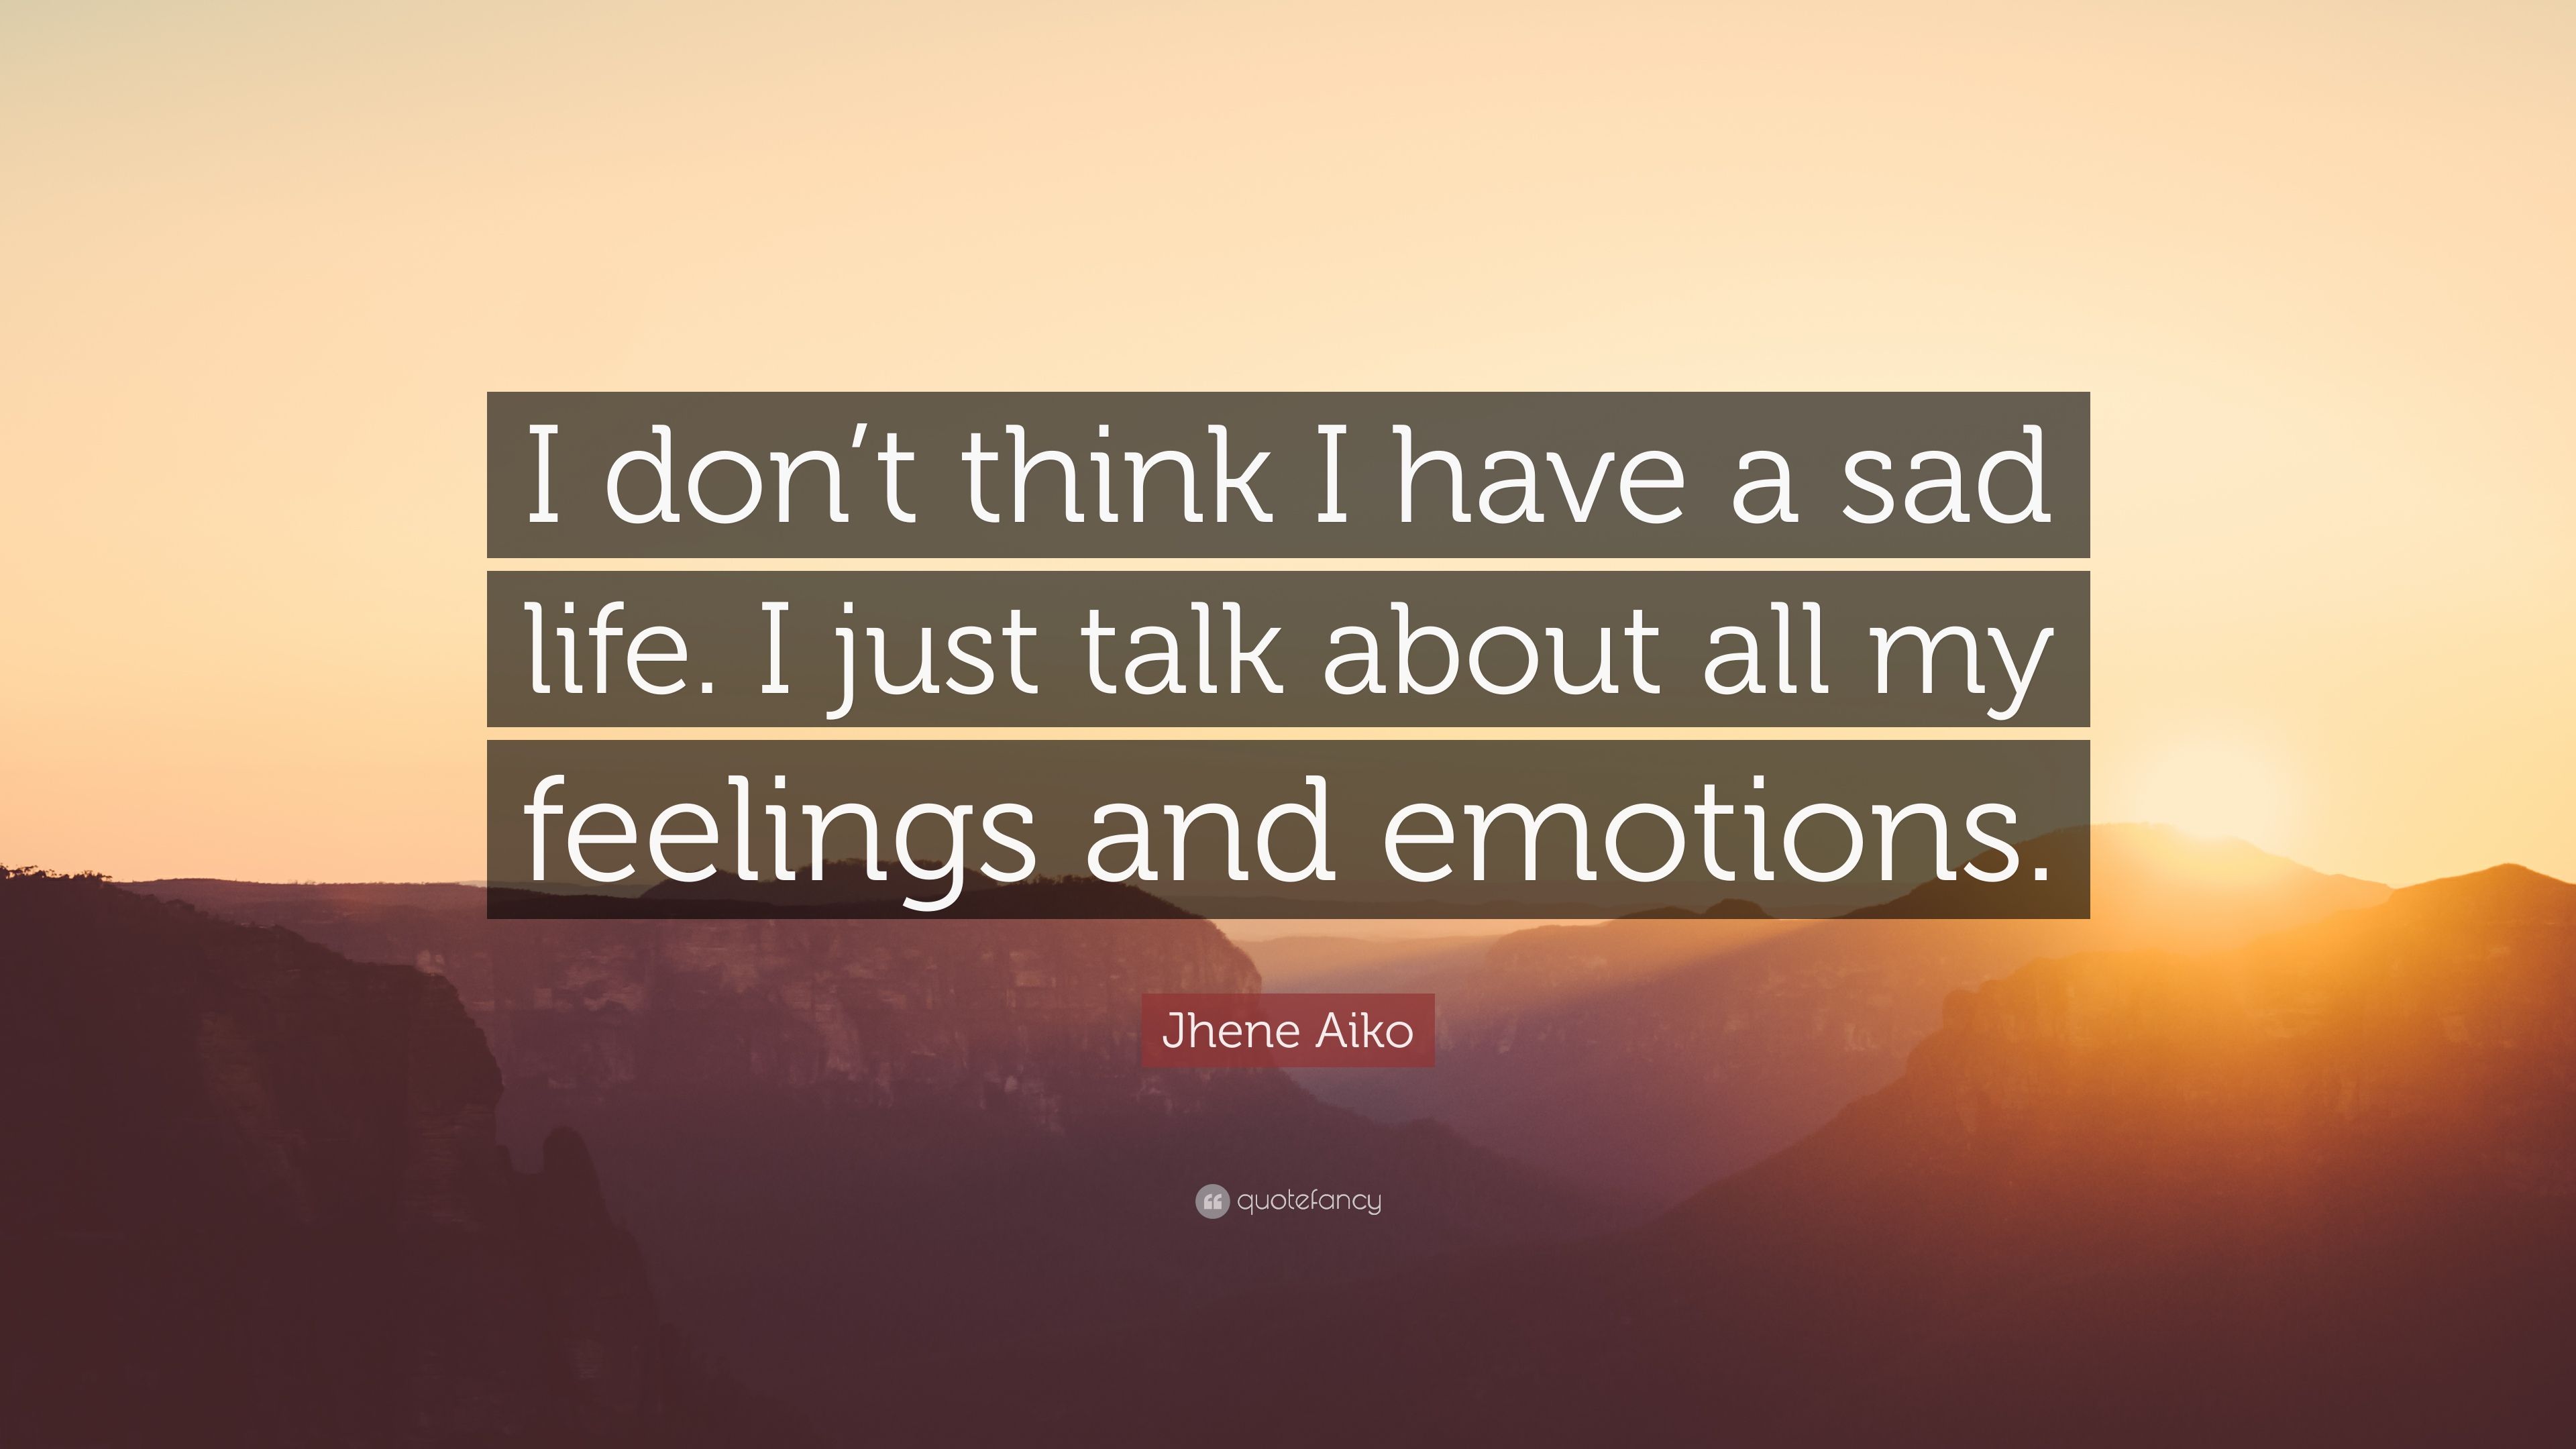 Jhene Aiko Quote: “I don't think I have a sad life. I just talk about all my feelings and emotions.” (7 wallpaper)